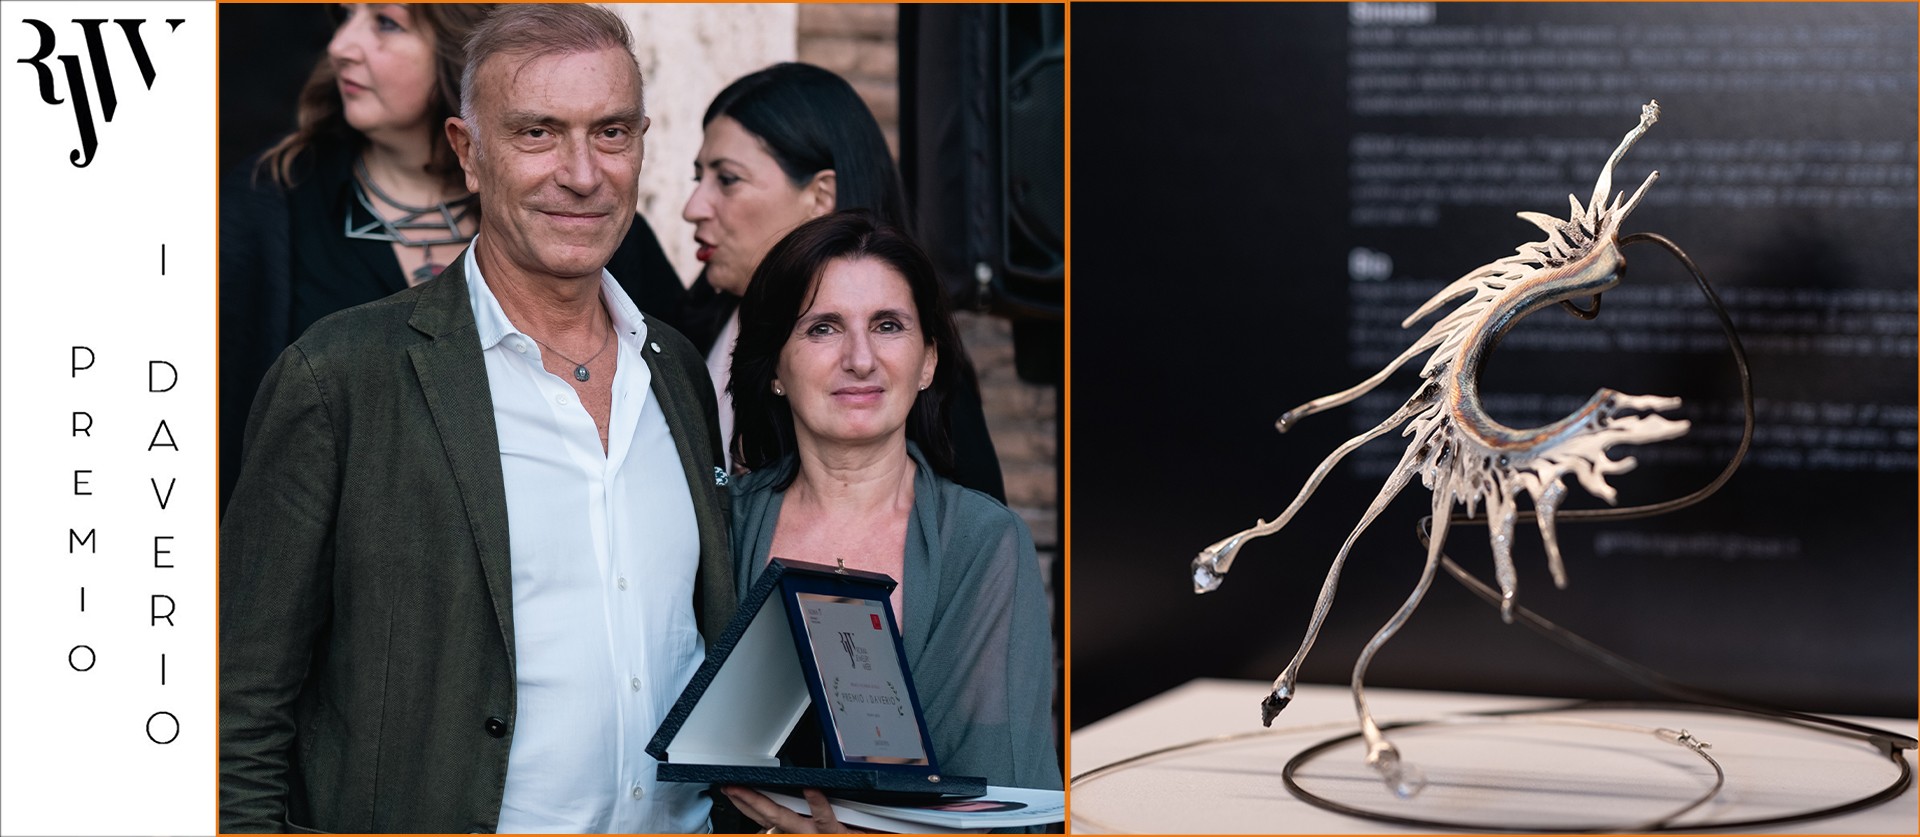 Roma Jewelry Week 2023, Roma Jewelry Week 2023, Angela Gentile receives the “I Daverio” award for jewel-sculpture